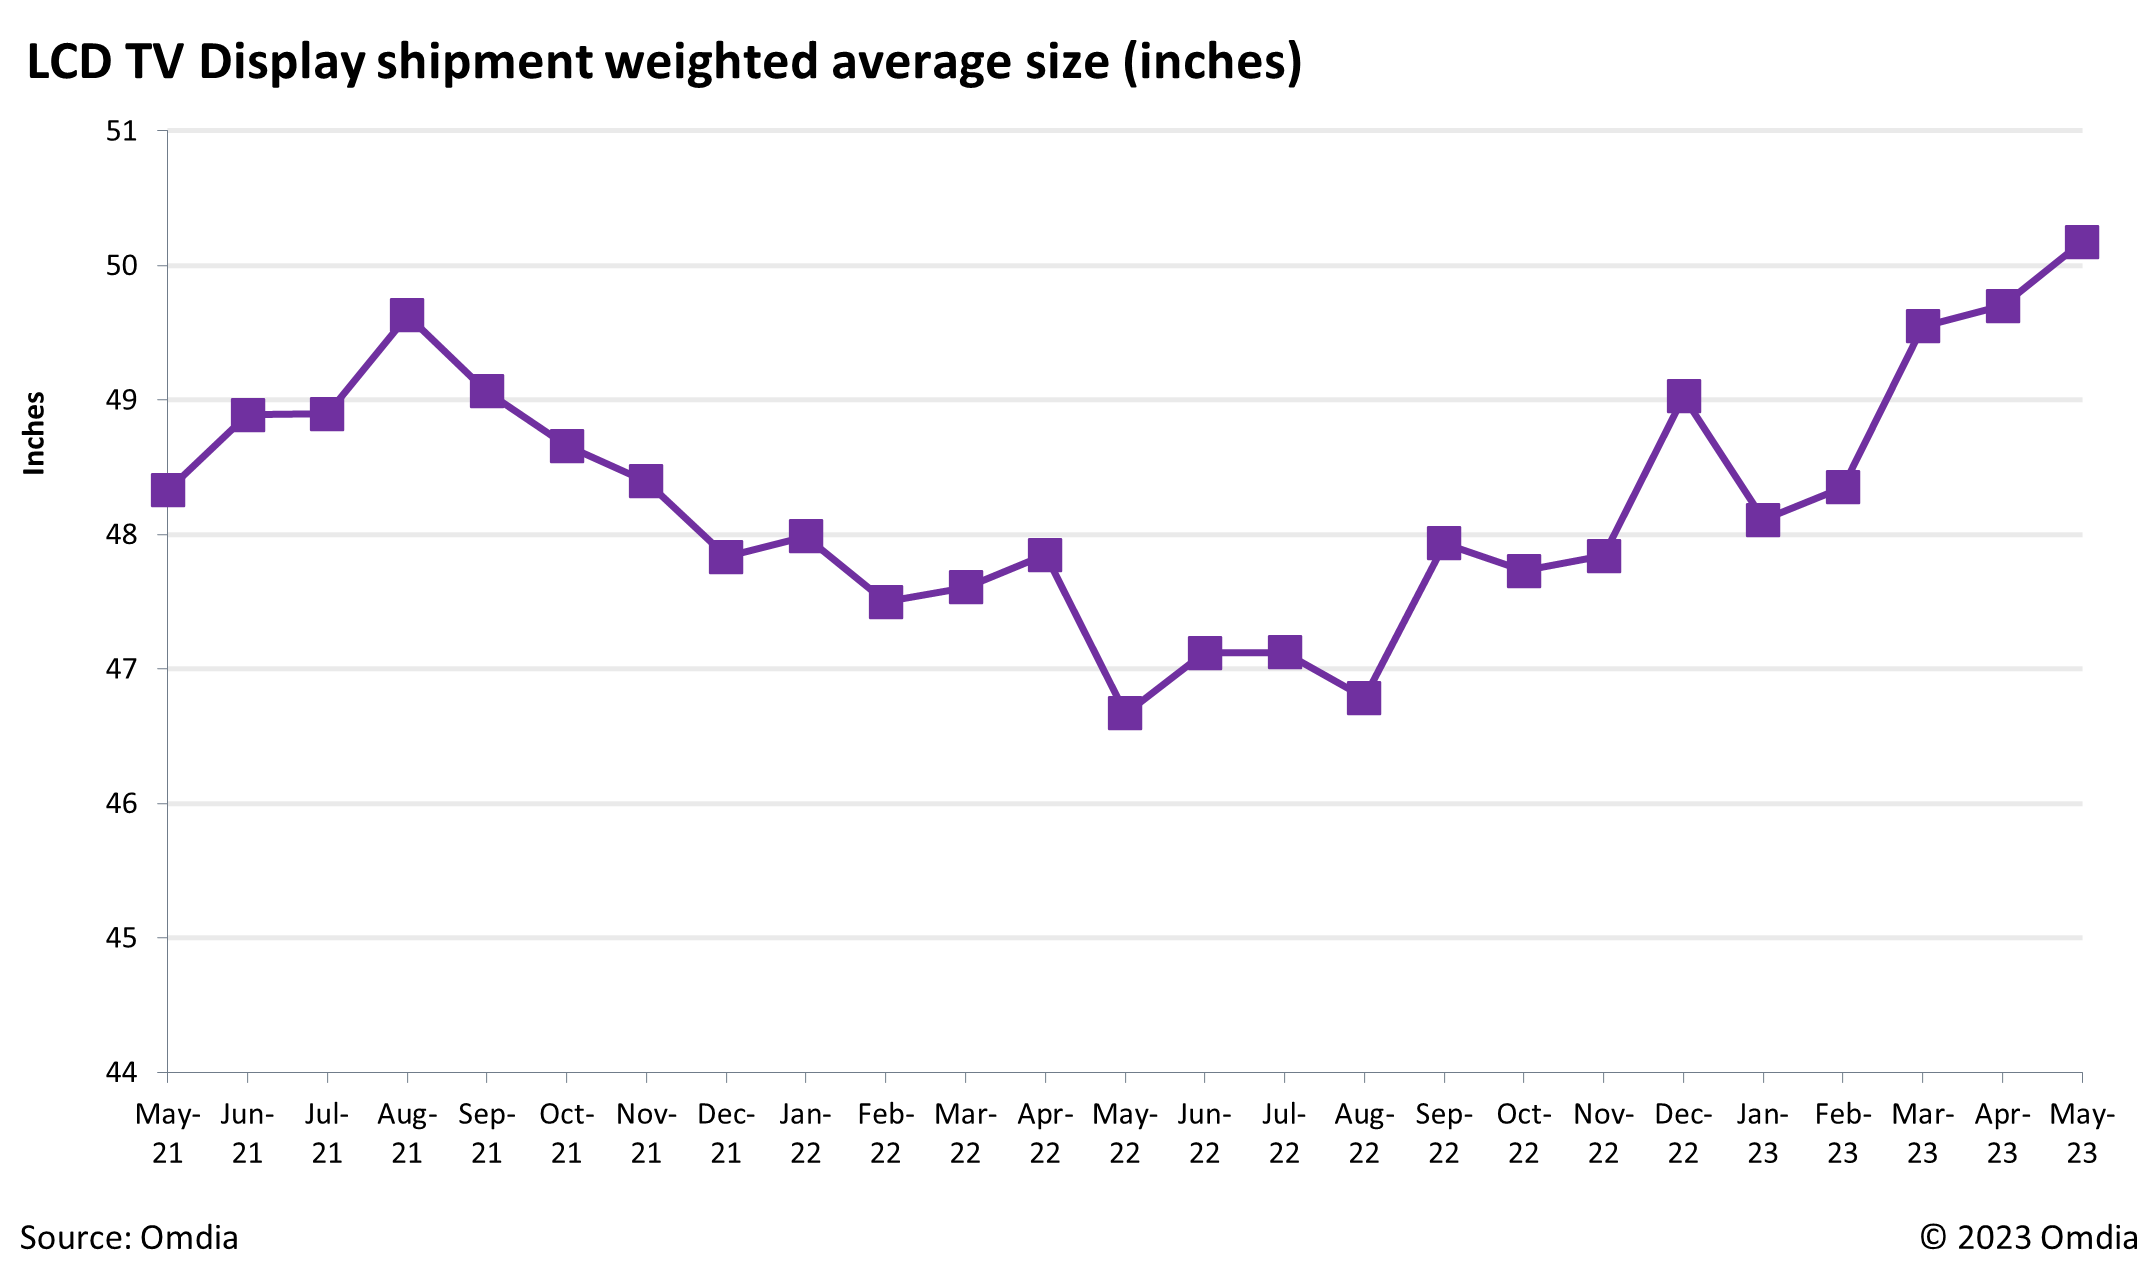 LCD TV Display shipment weighted average size inches - May 2021-May 2023